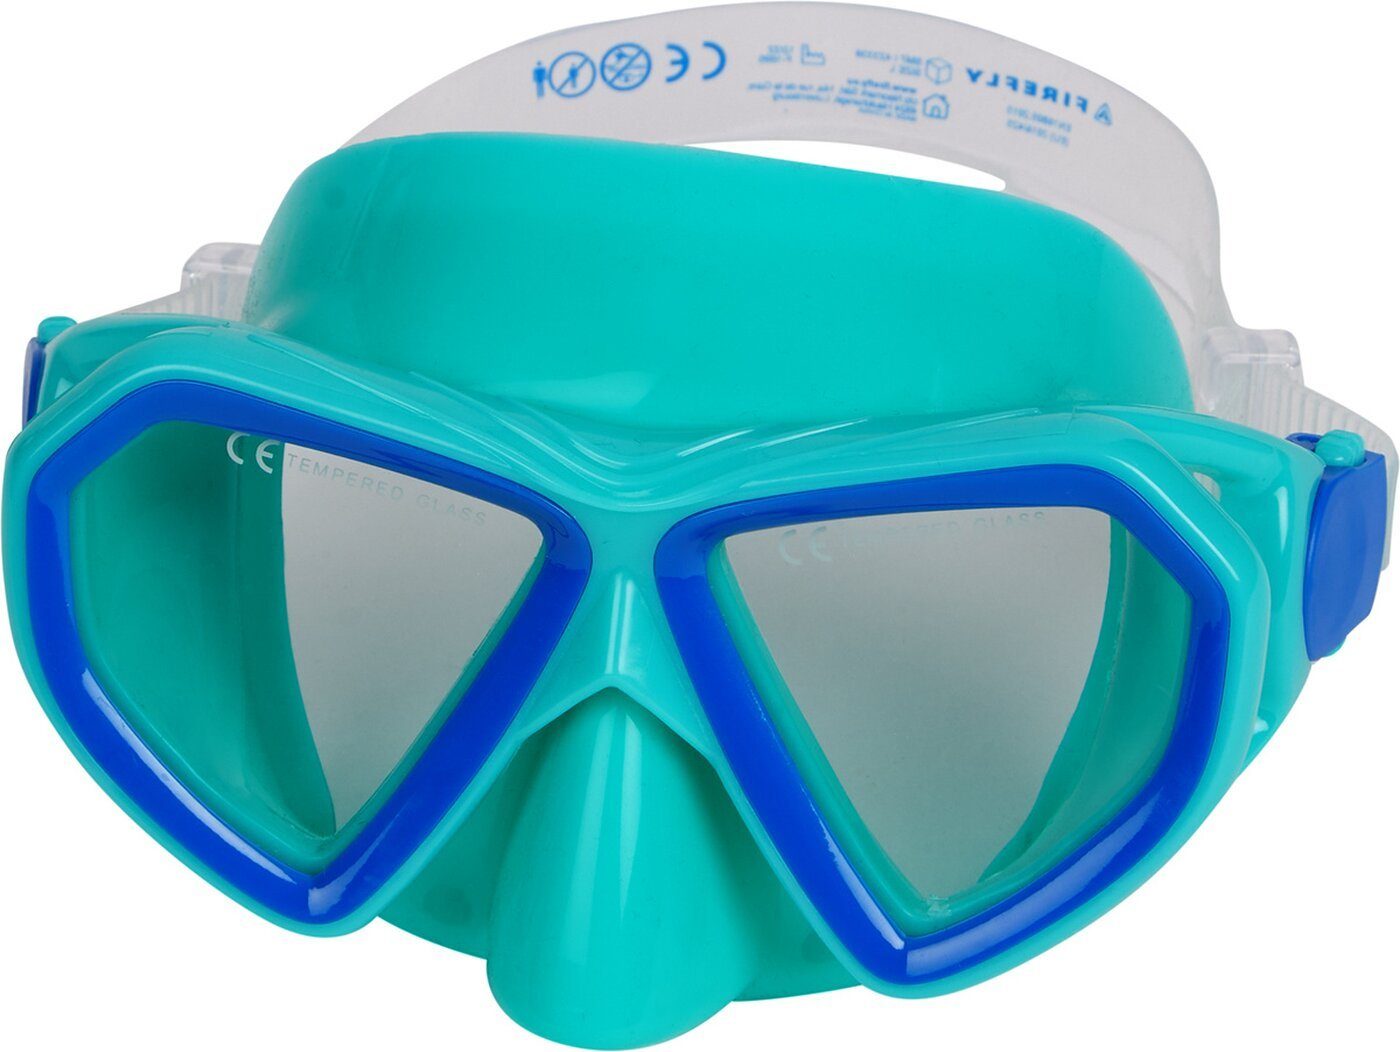 FIREFLY Taucherbrille Ux.-Tauch-Maske SM7 I TURQUOISE/TURQUOISE